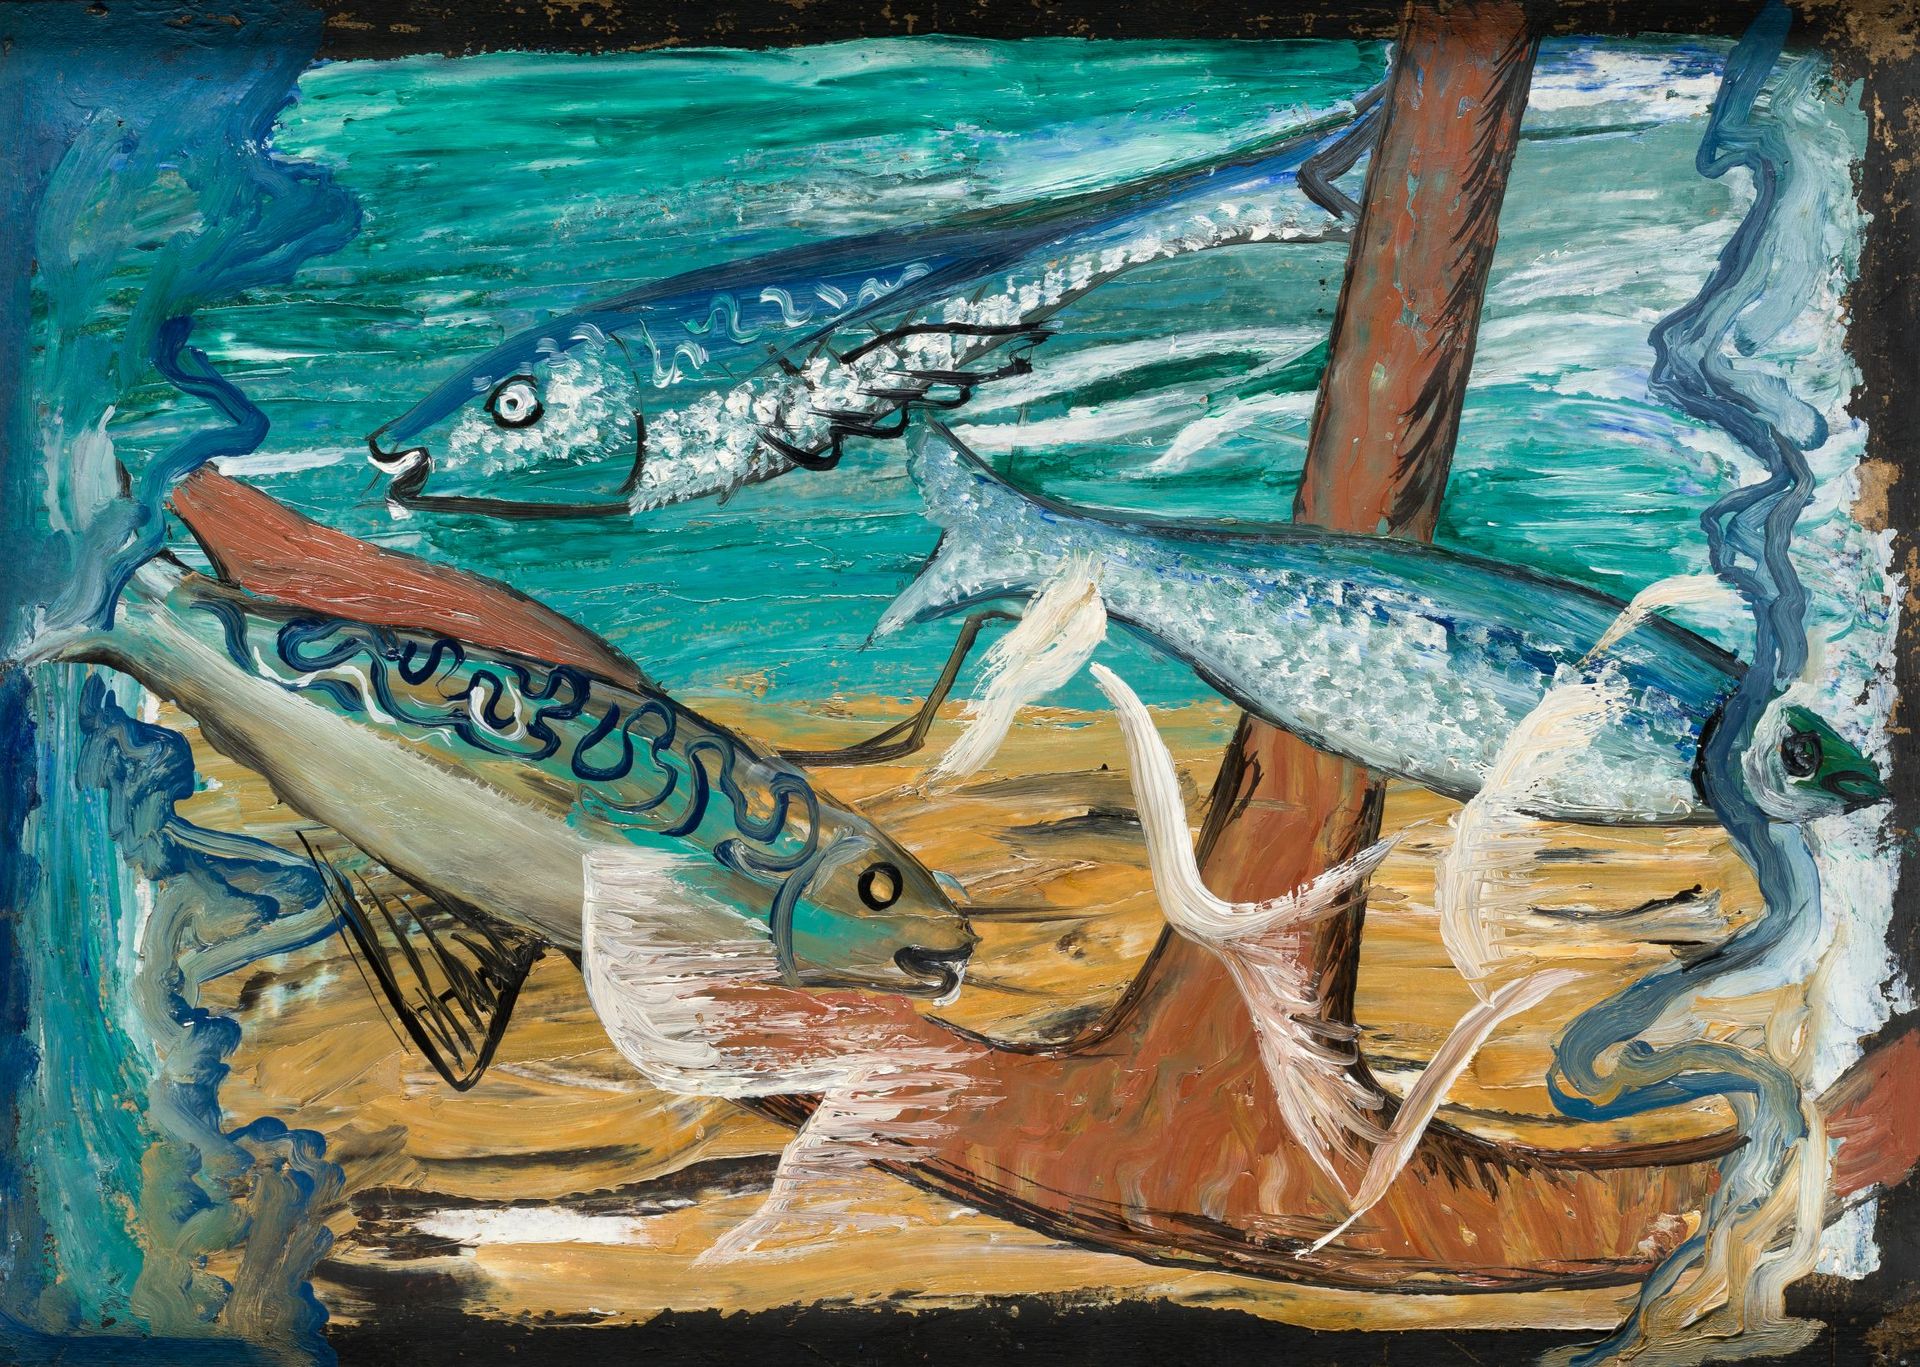 BENJAMÍN PALENCIA (1894 / 1980) "Fishes" Attached is a certificate of authentici&hellip;